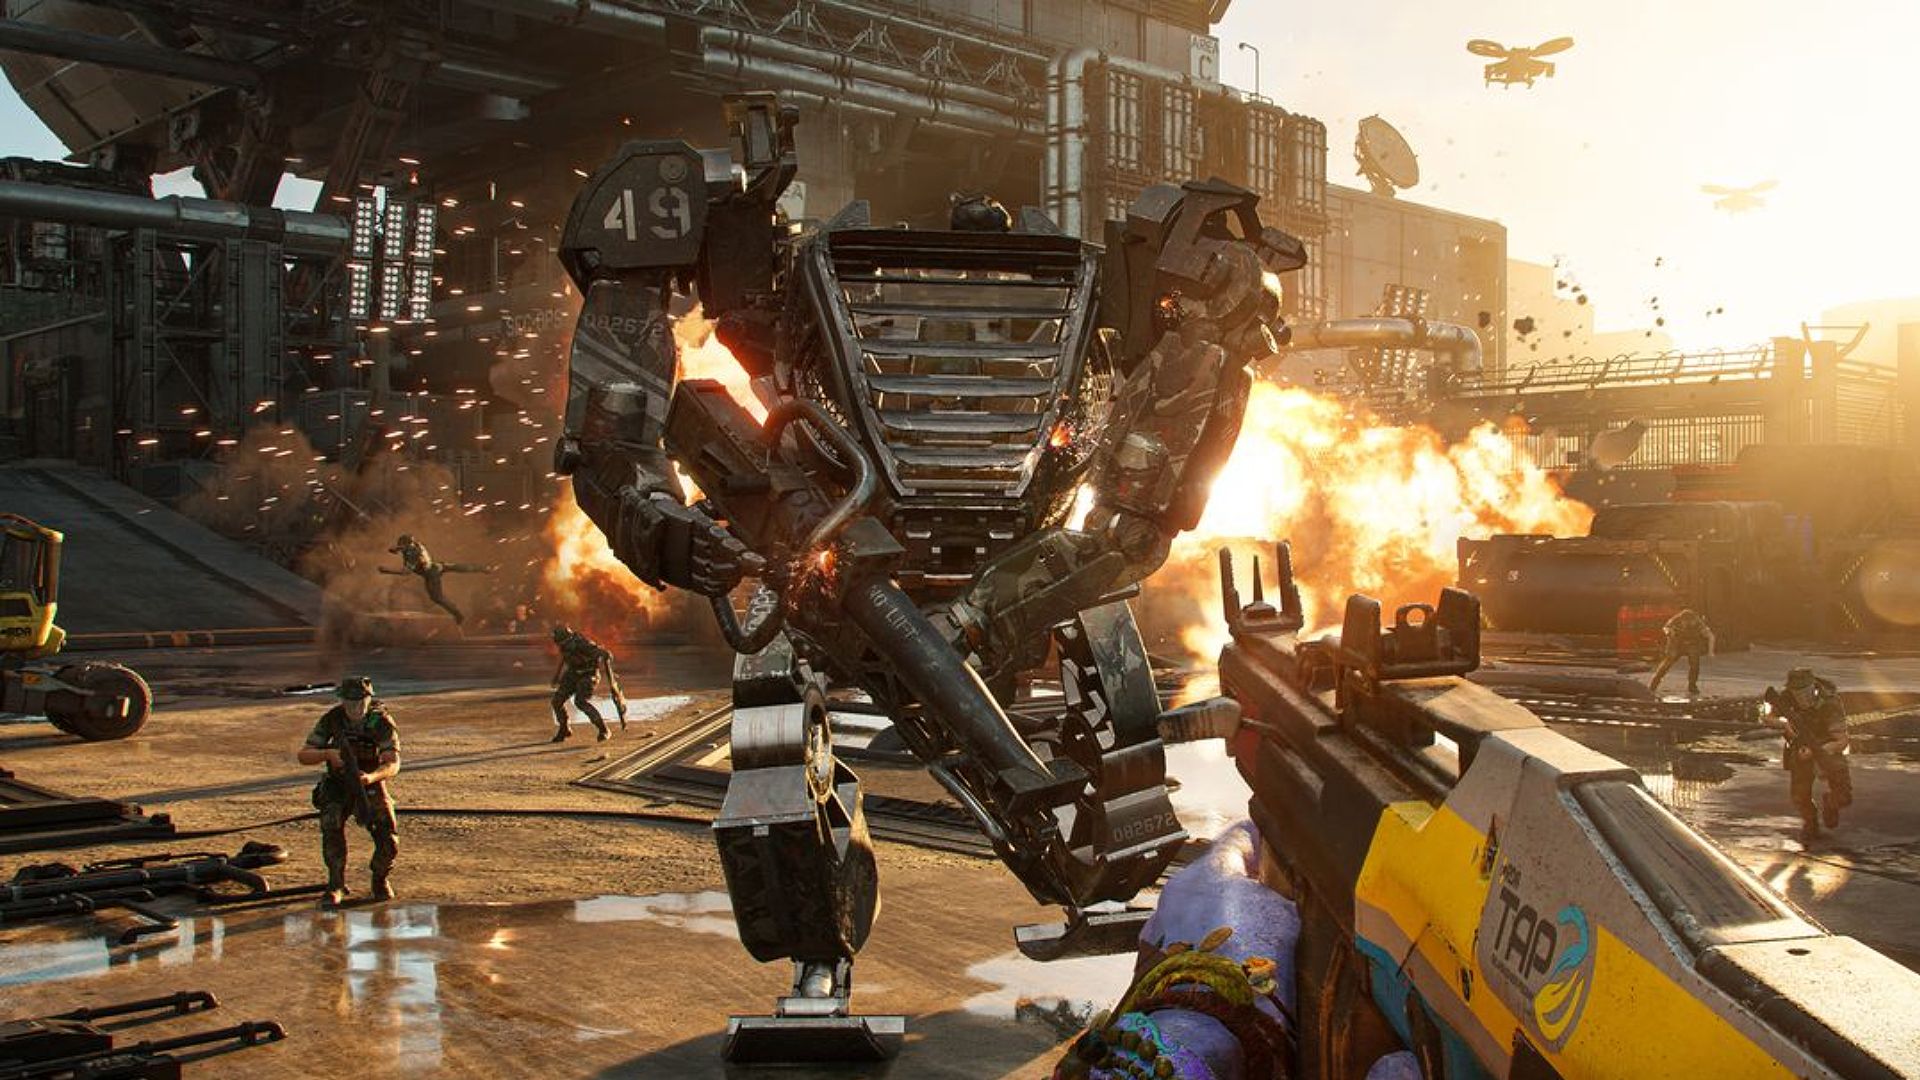 The player shooting a mech in Avatar: Frontiers of Pandora